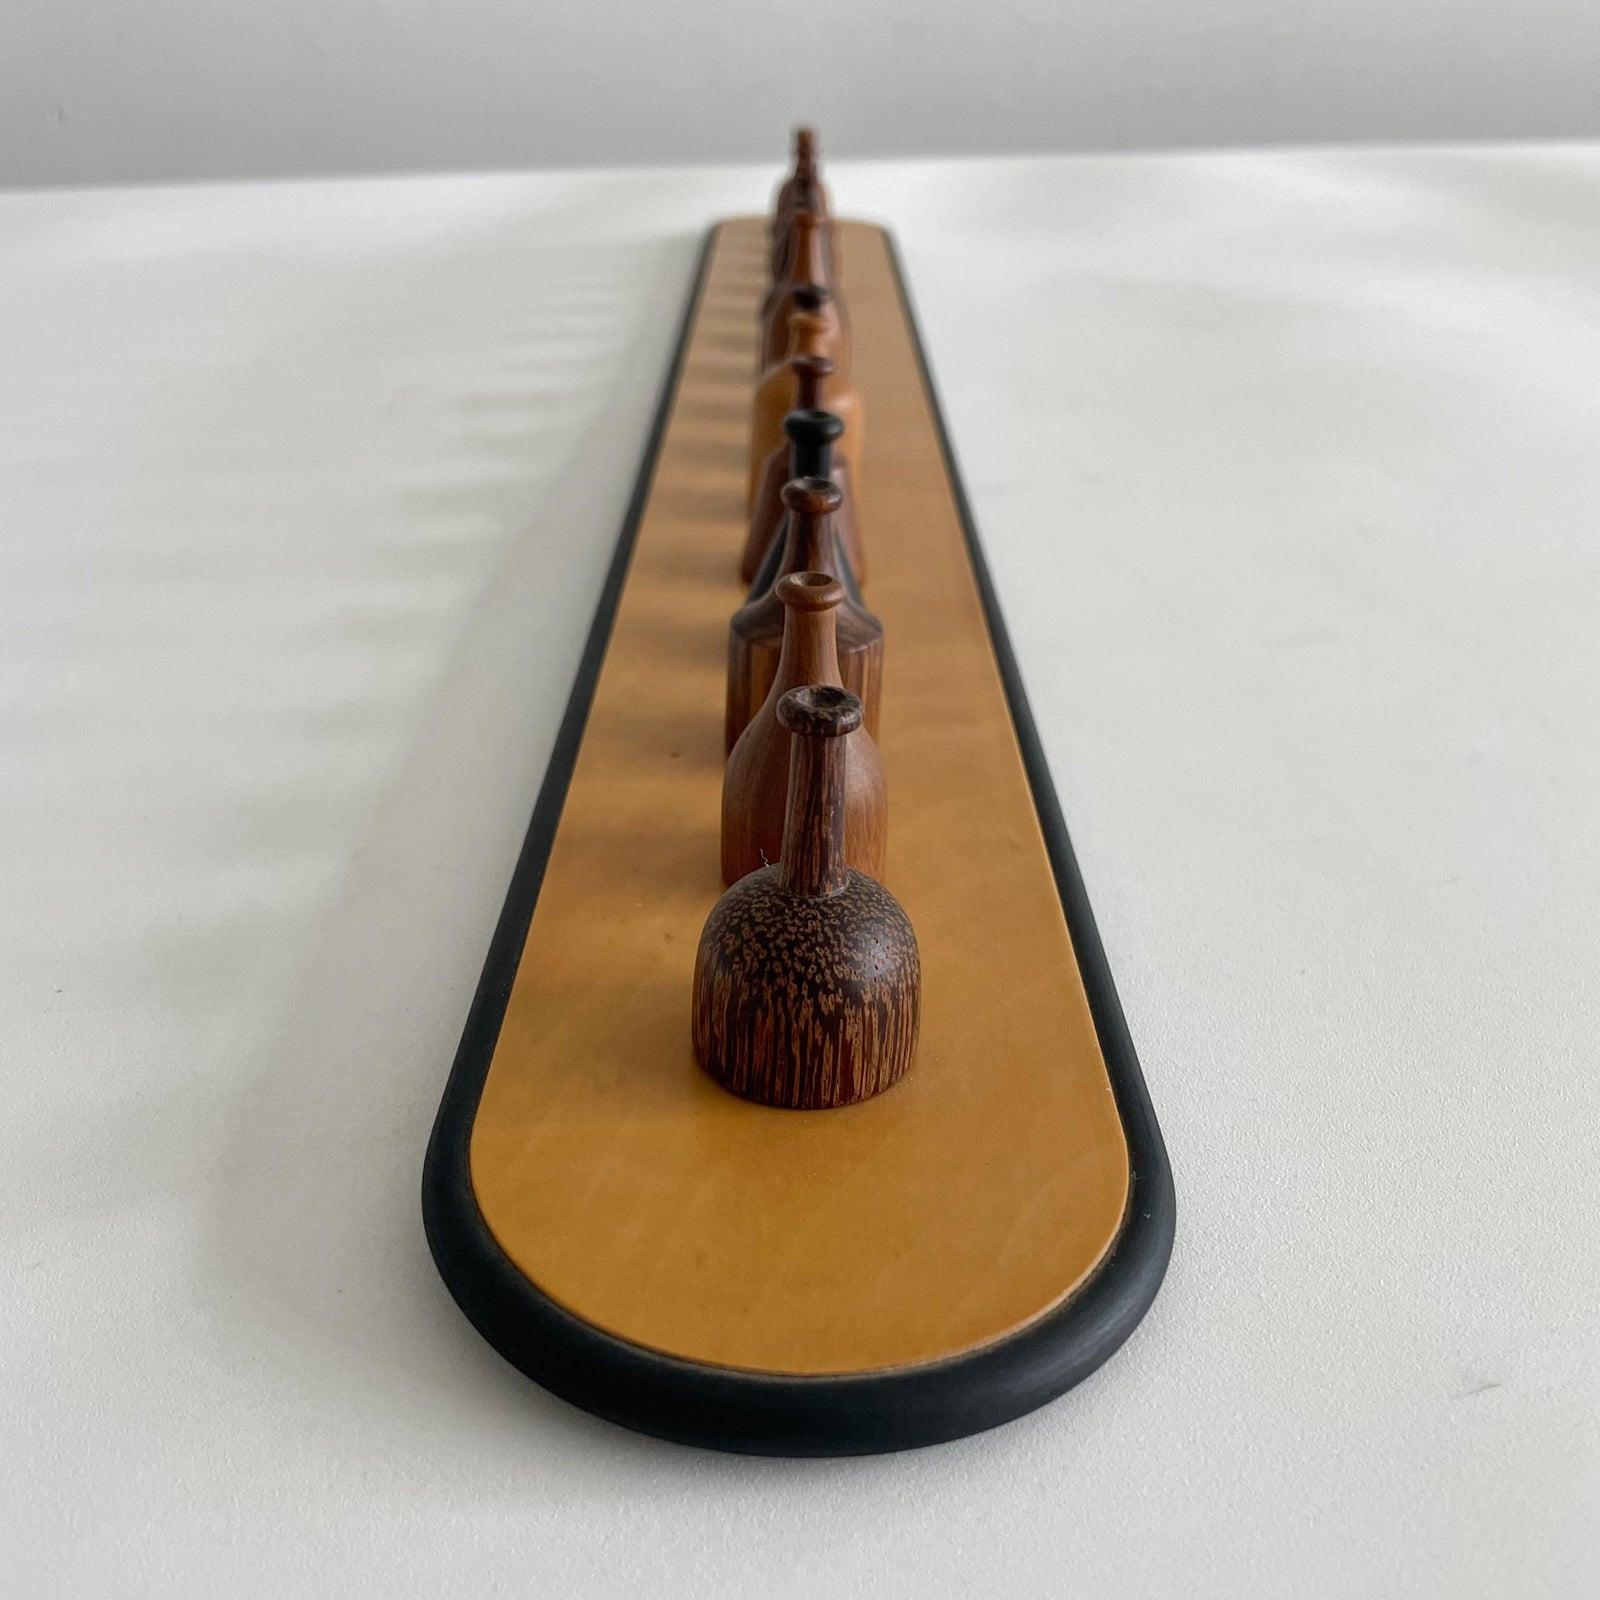 Giorgio Pizzitutti Exotic Wood Miniature Vases Sculpture Italy 1980's In Good Condition For Sale In West Palm Beach, FL